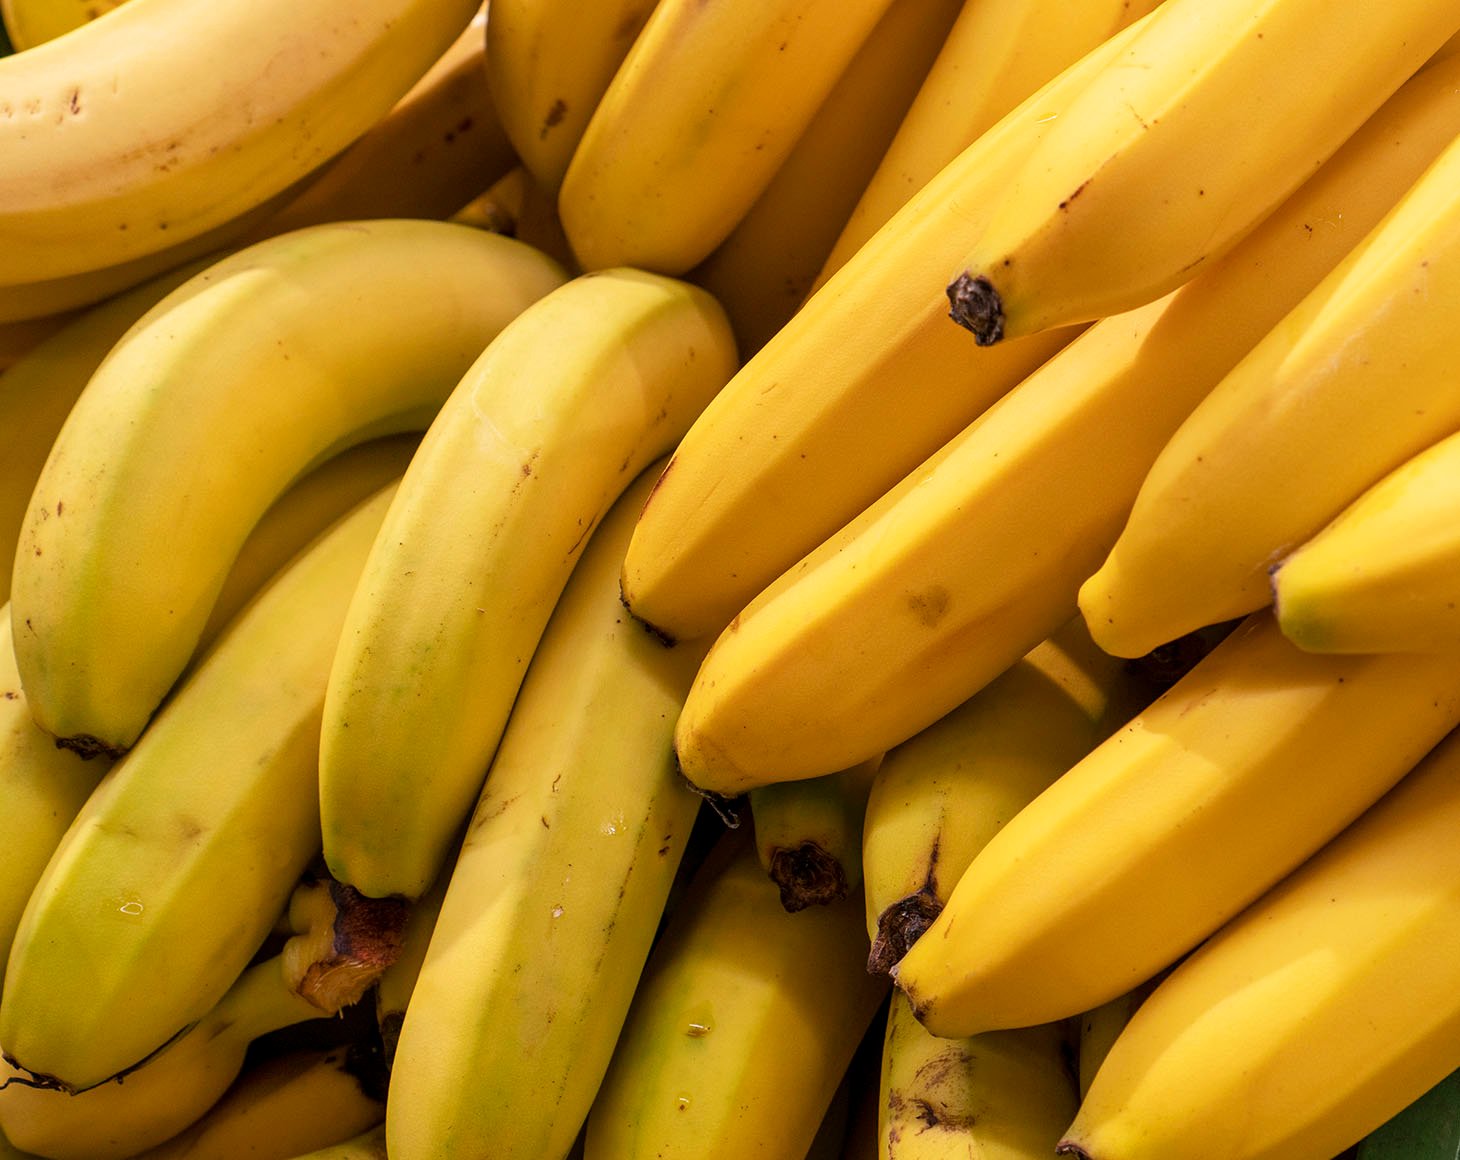 bunches of ripe yellow bananas close up